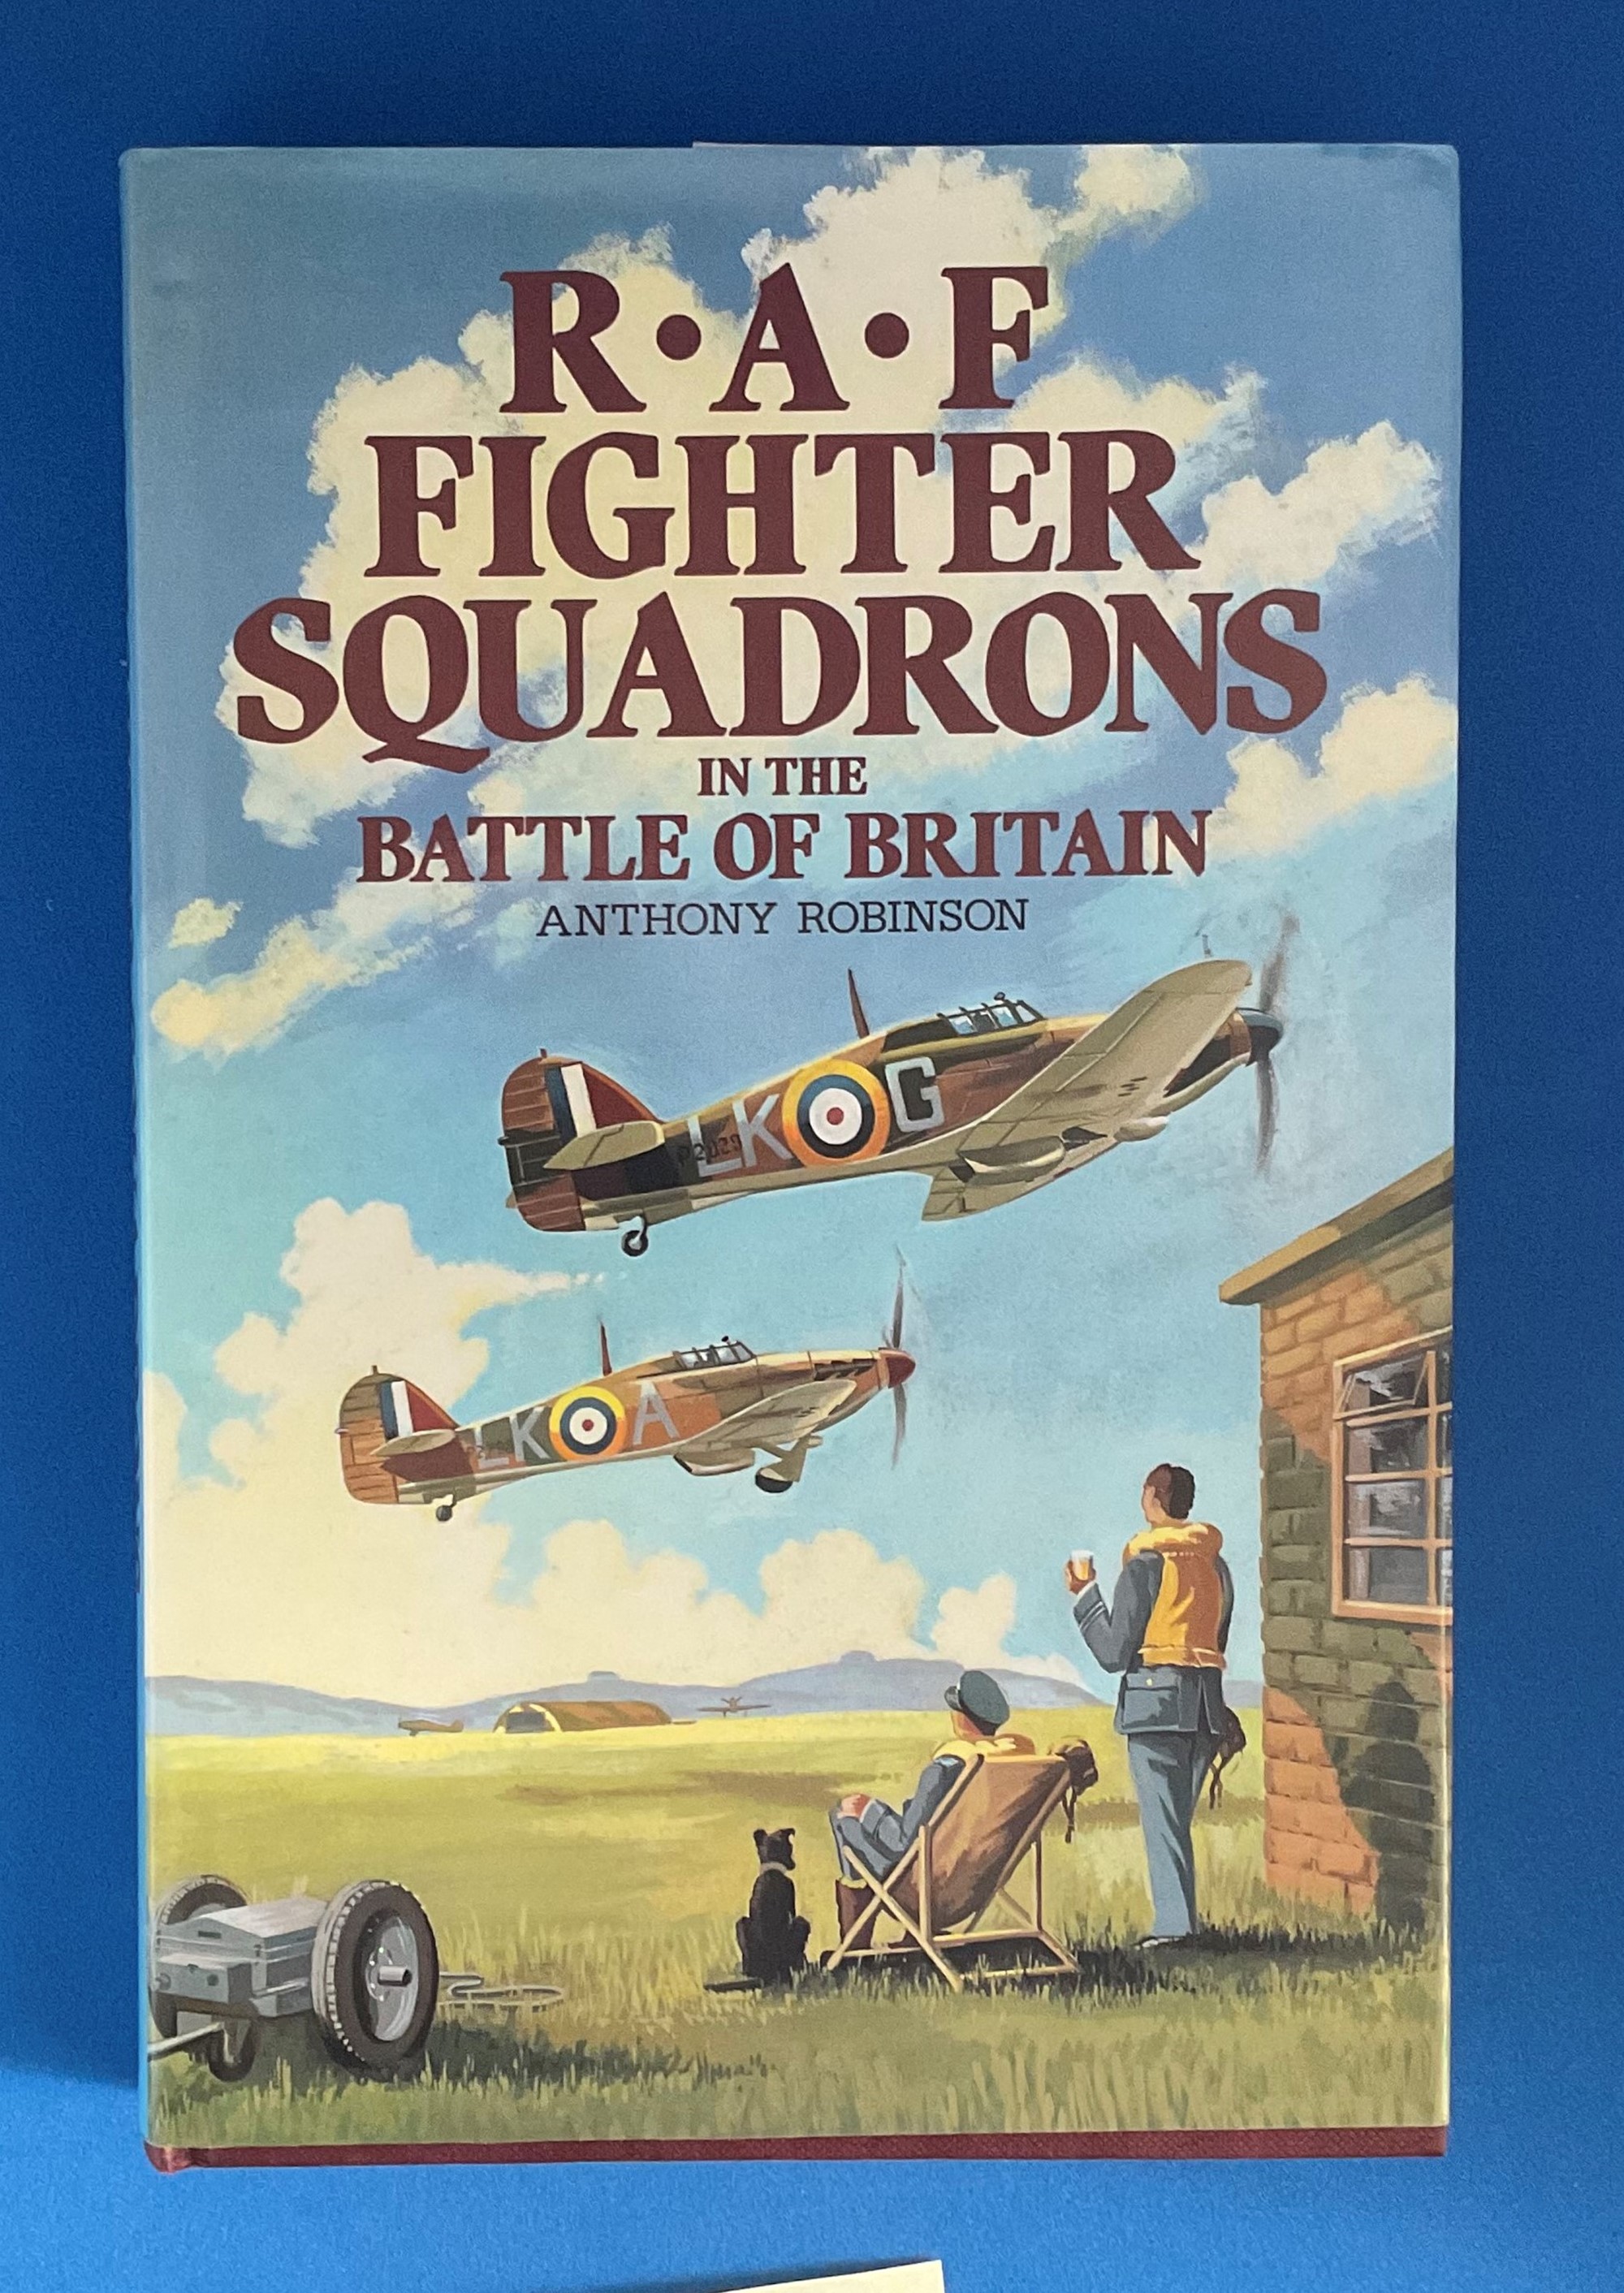 WW2 Battle of Britain Pilots Signed RAF Fighter Squadrons in the Battle of Britain Hardback Book. - Image 2 of 2